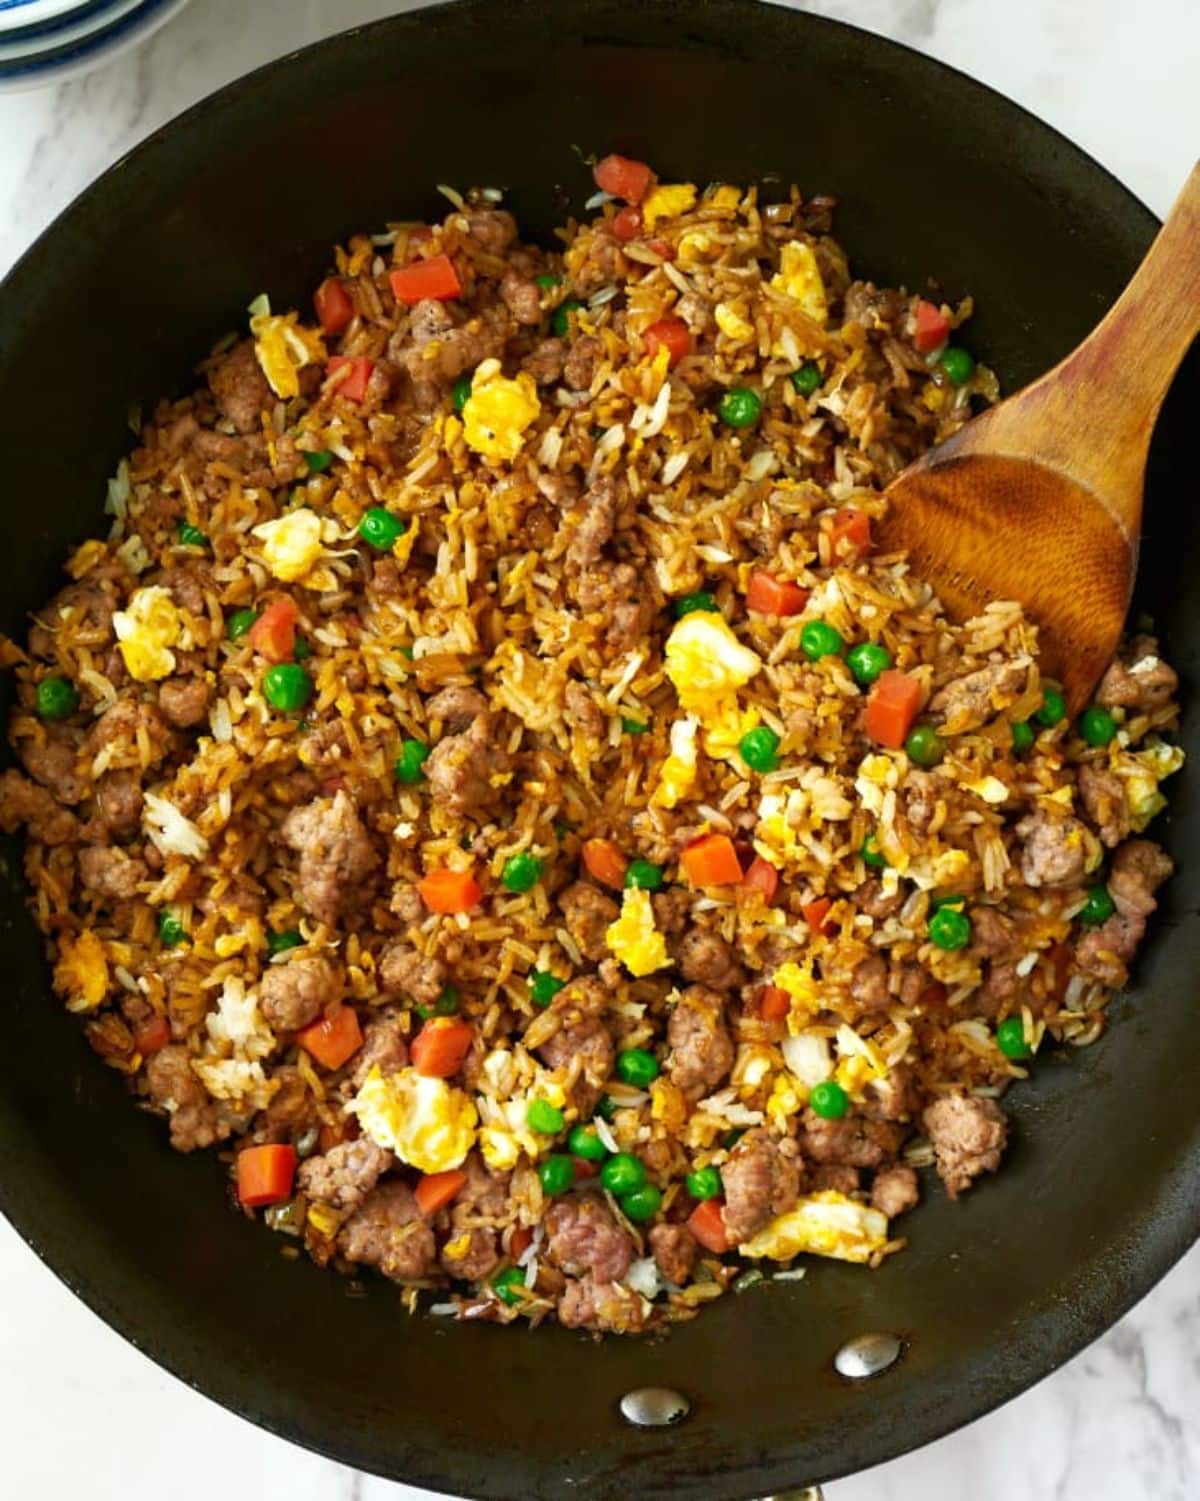 Pork Fried Rice in a black pan with a wooden spatula.